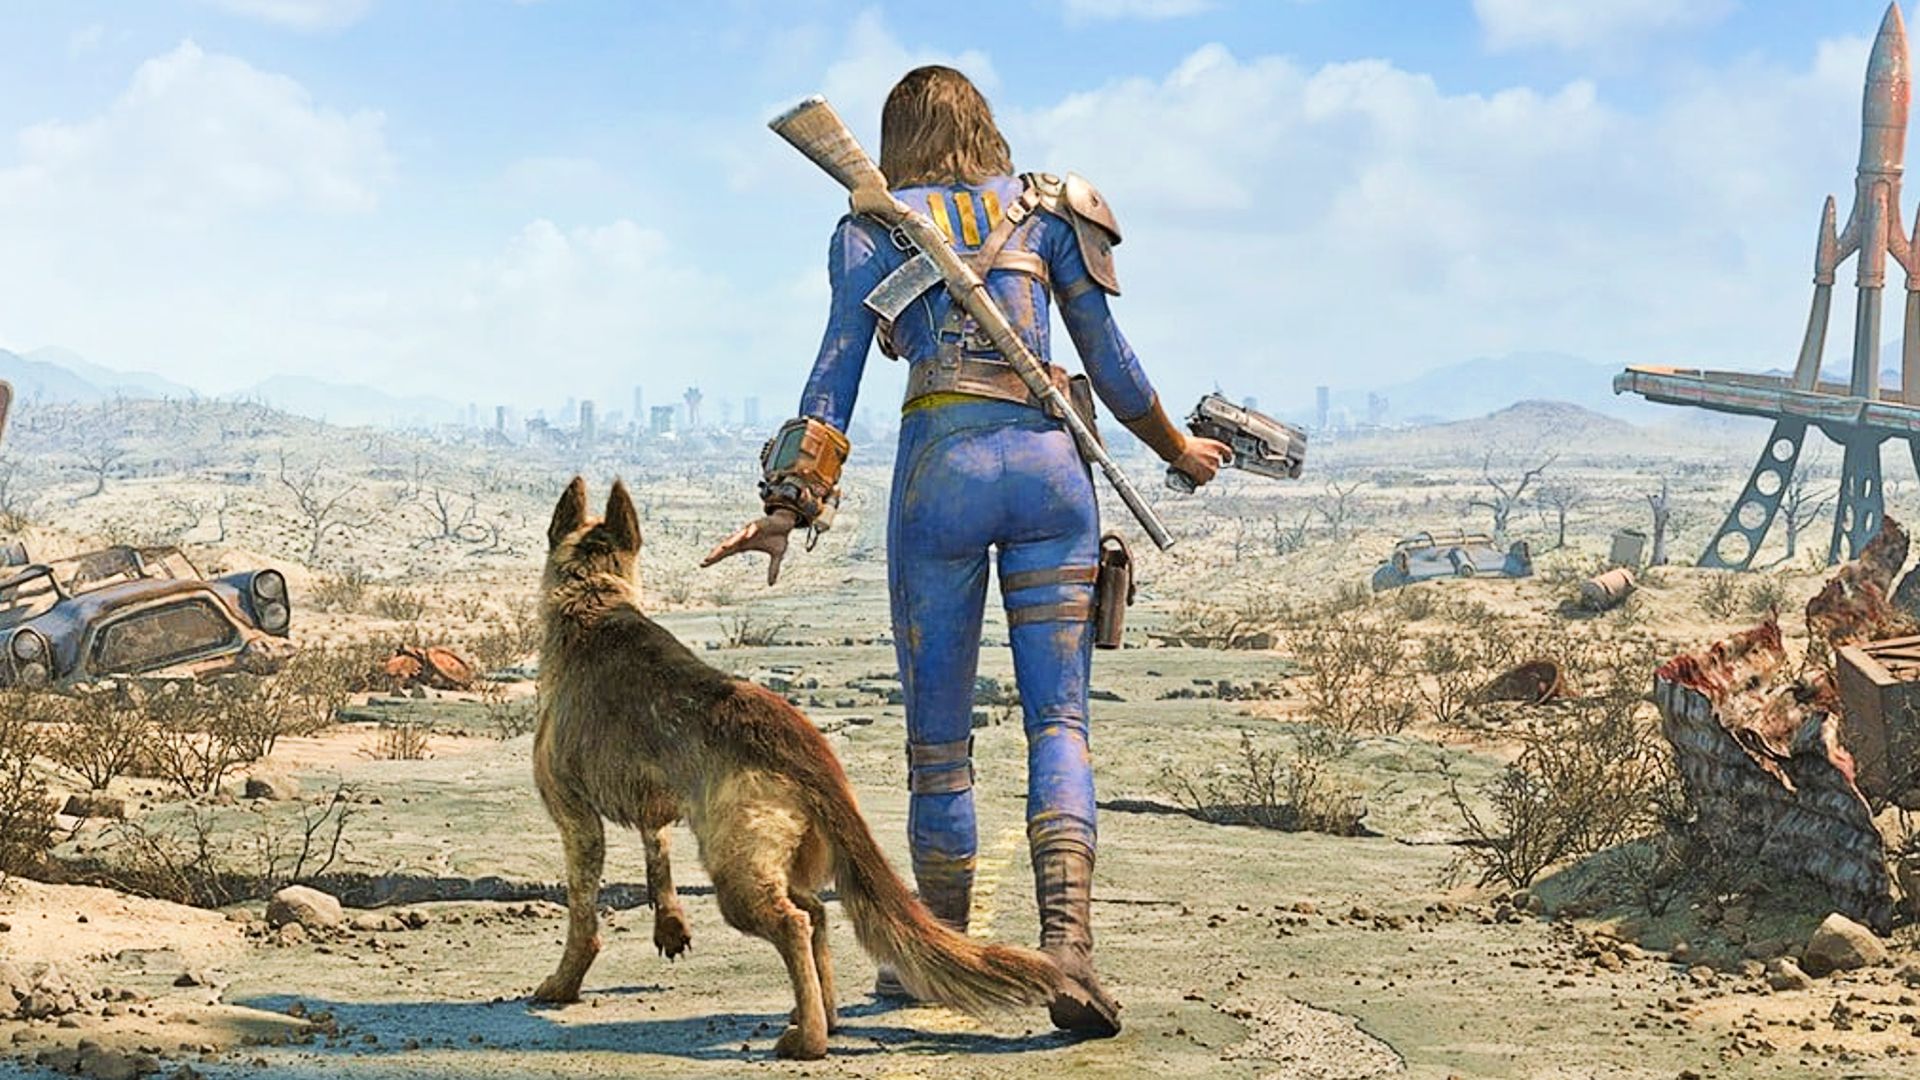 Fallout 4 is getting a surprise next gen upgrade